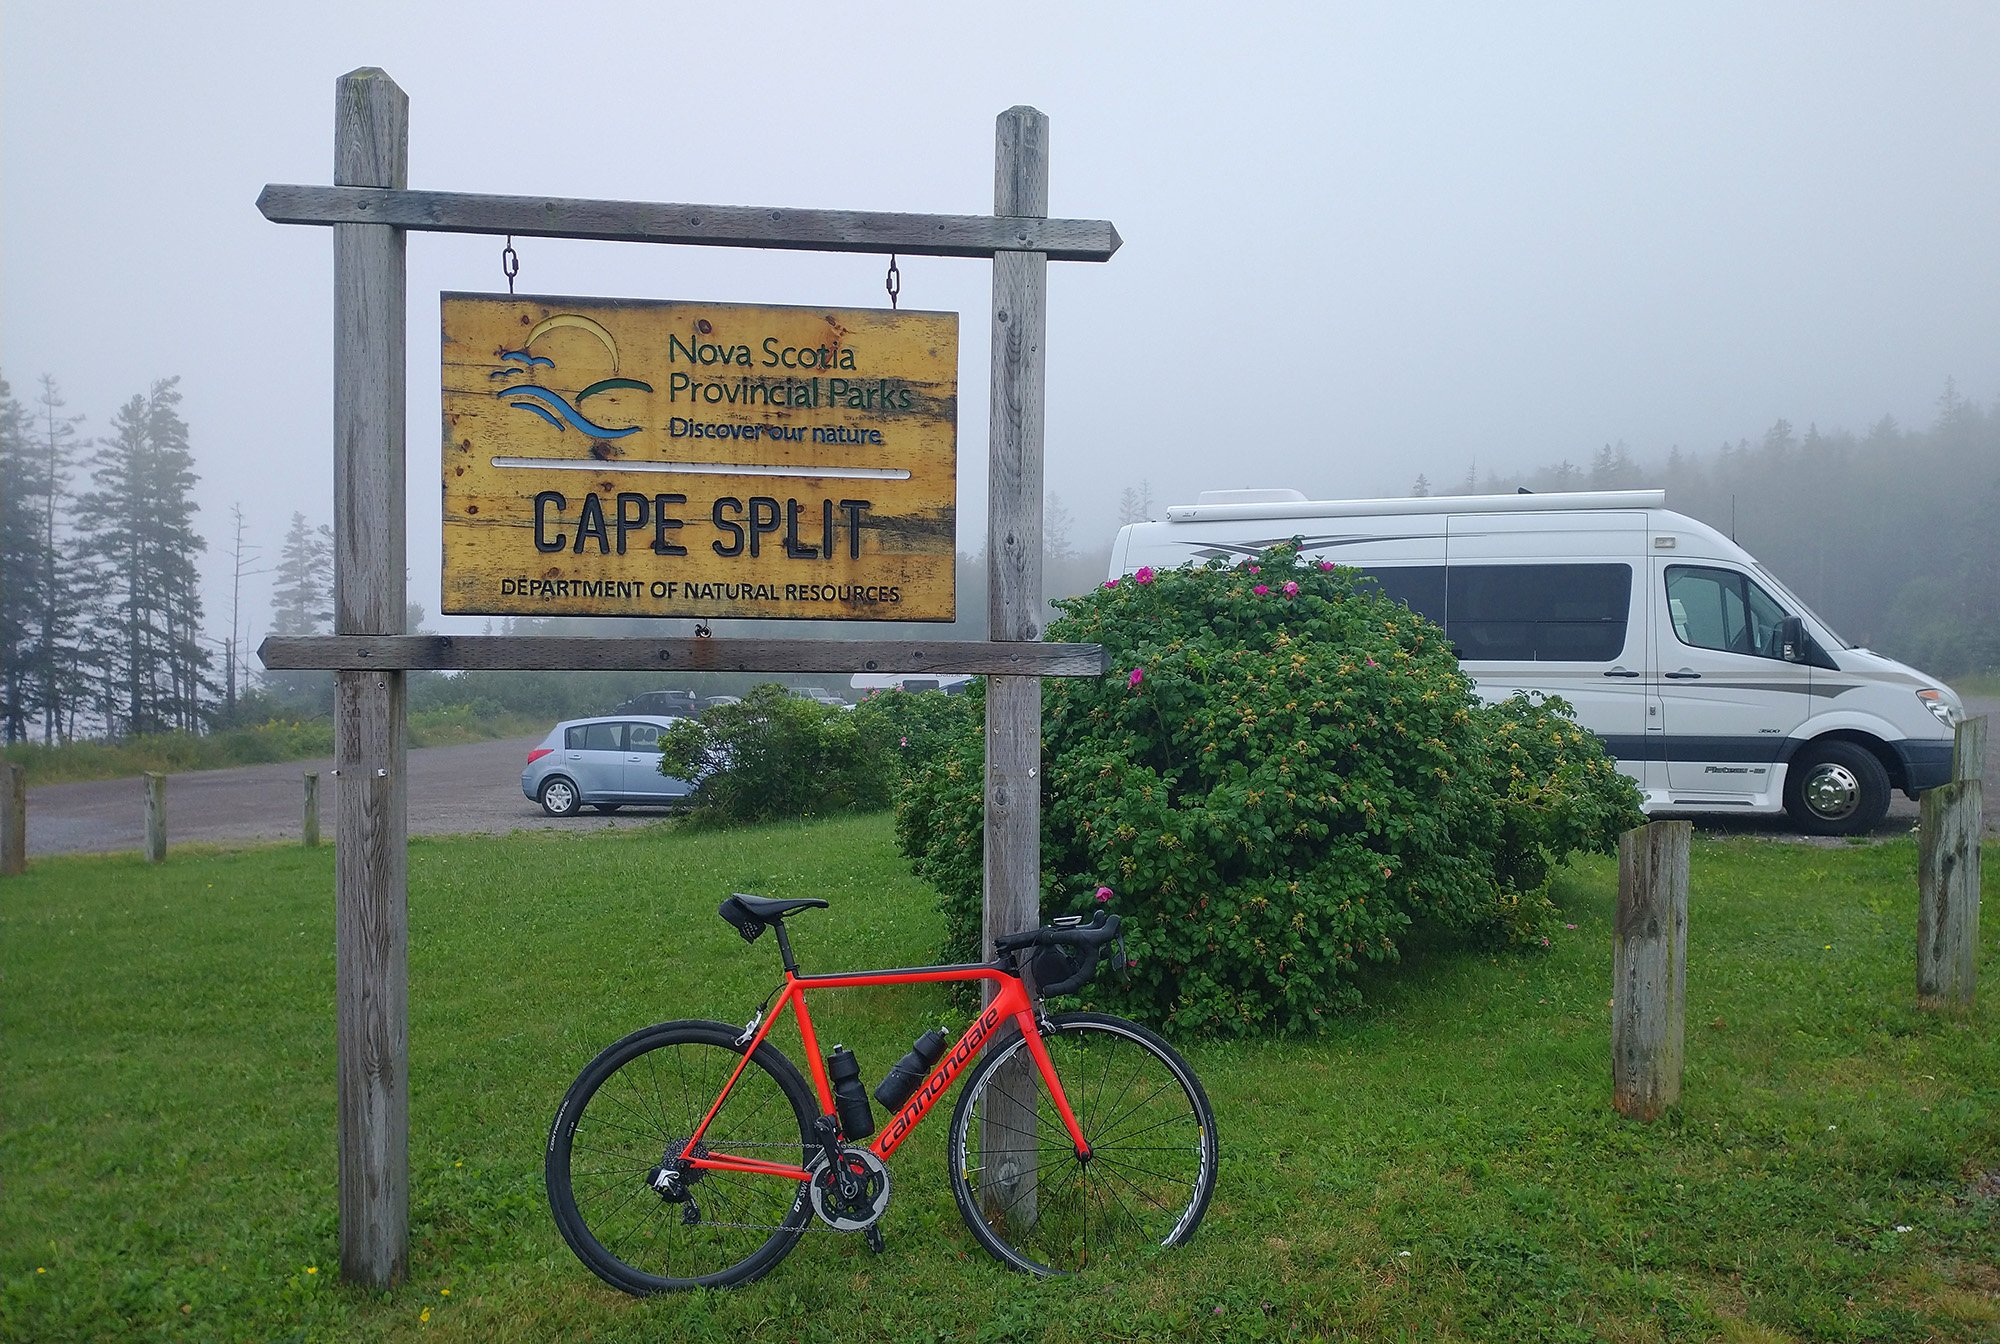 Cape spit parking lot. Tons of people there already to start the 6km hike to the actual tip.